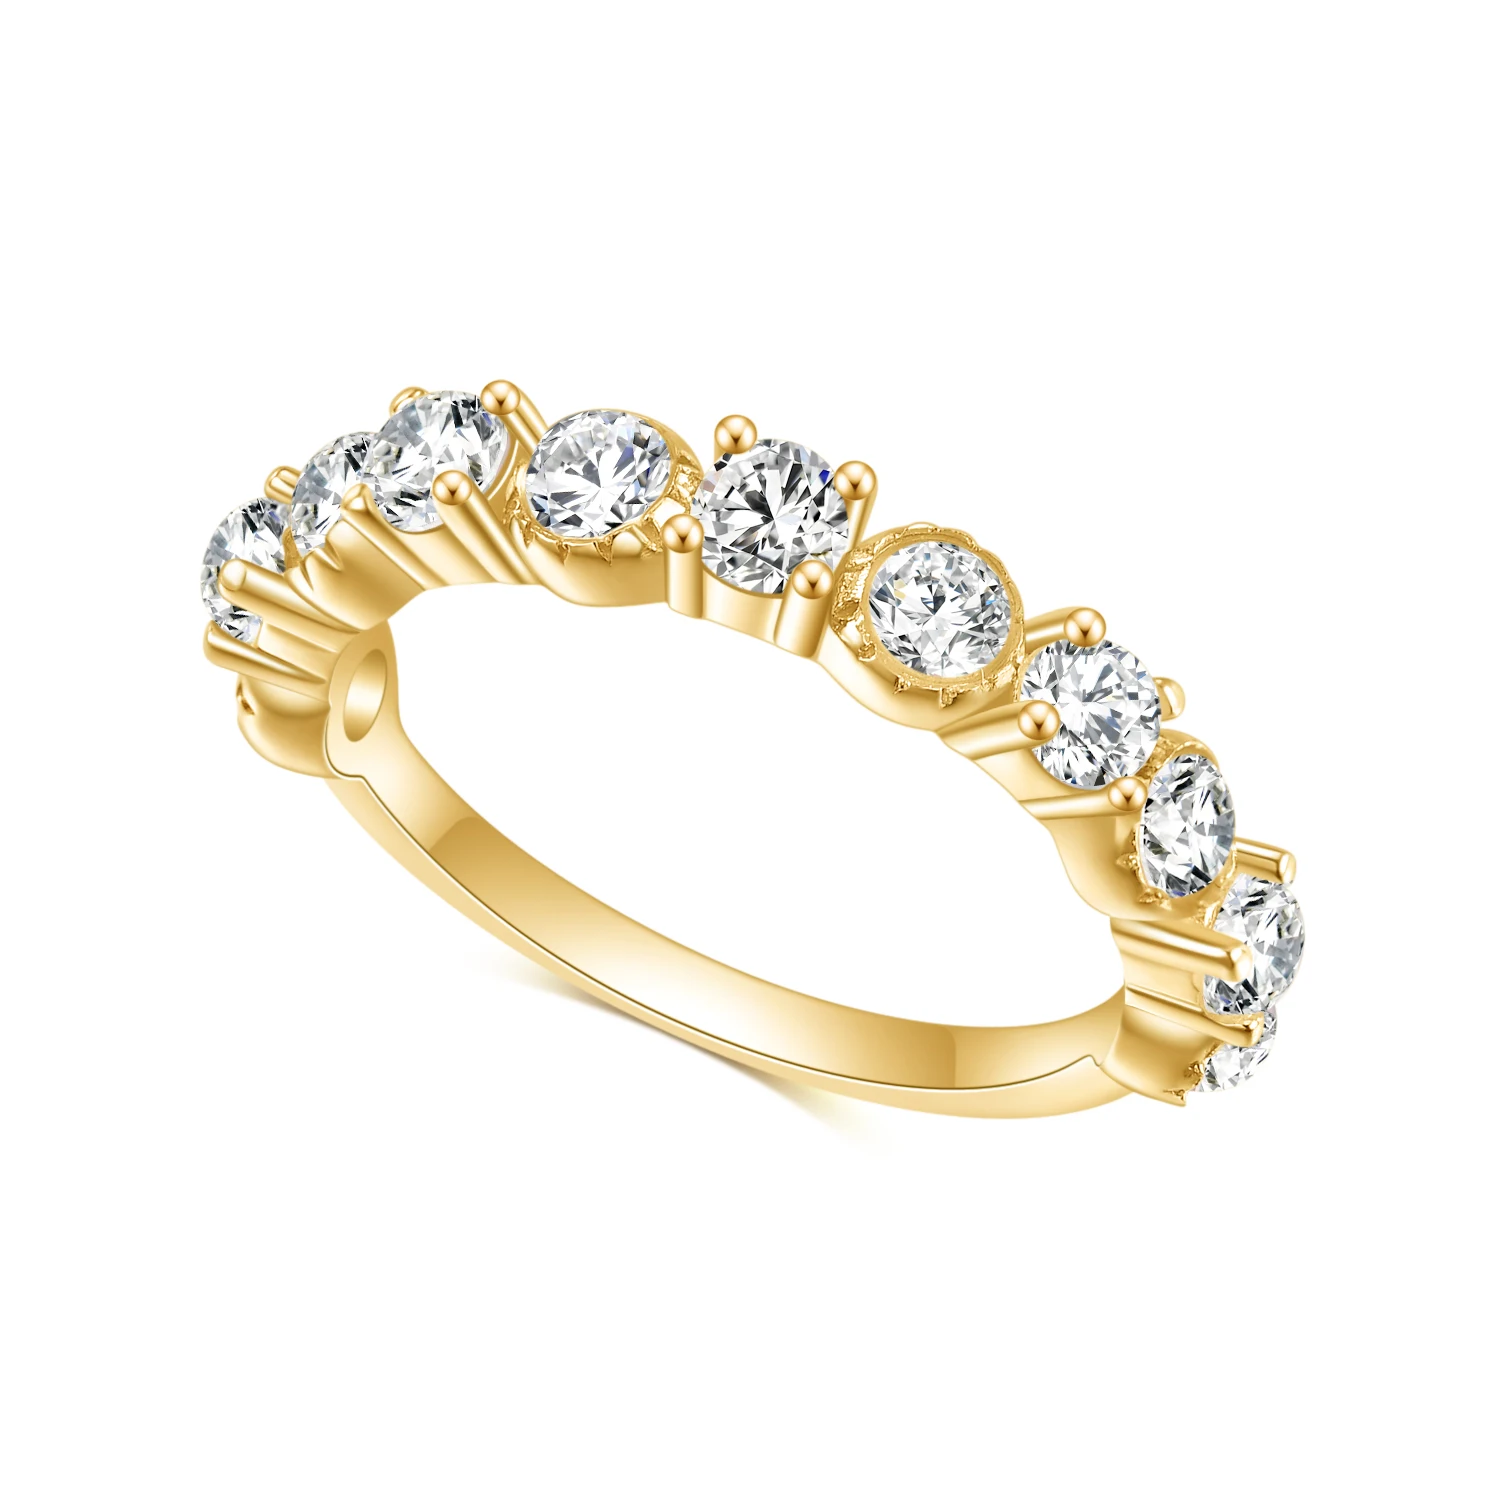 Gold Wedding Band Rings Luxe Anthology Round Cut Brilliant Colorless Moi... - $68.58